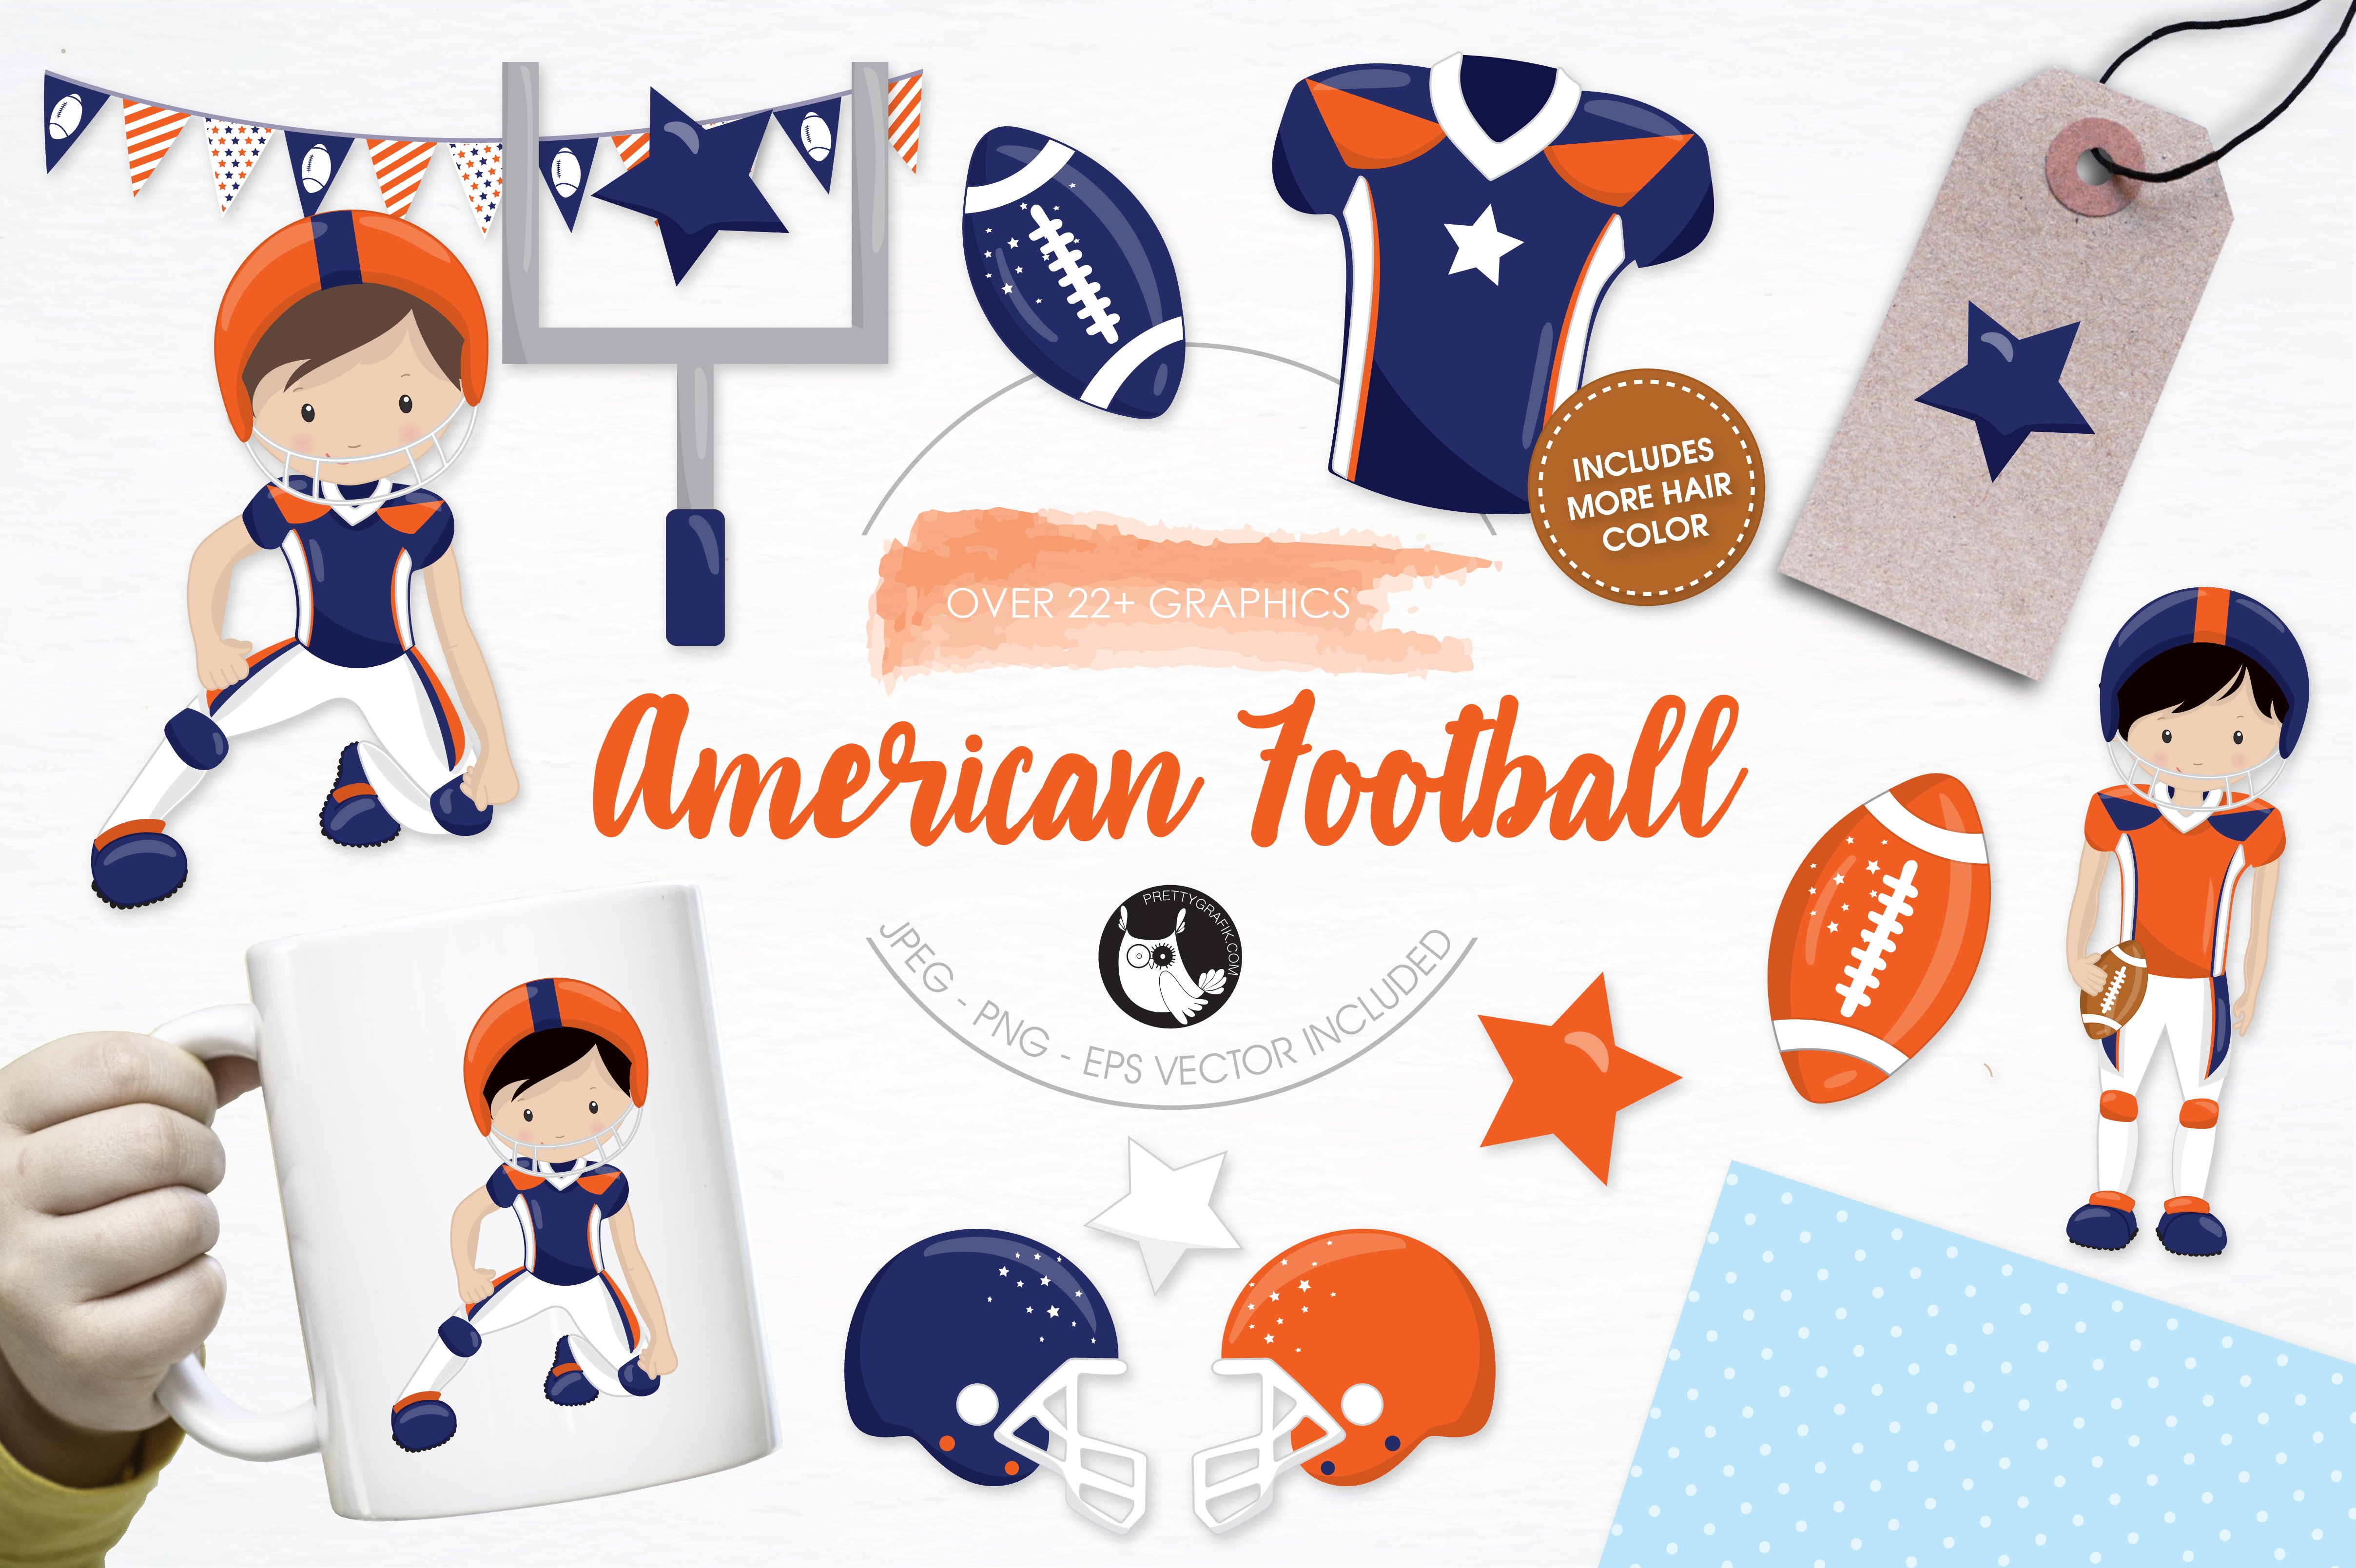 American football illustration pack cover image.